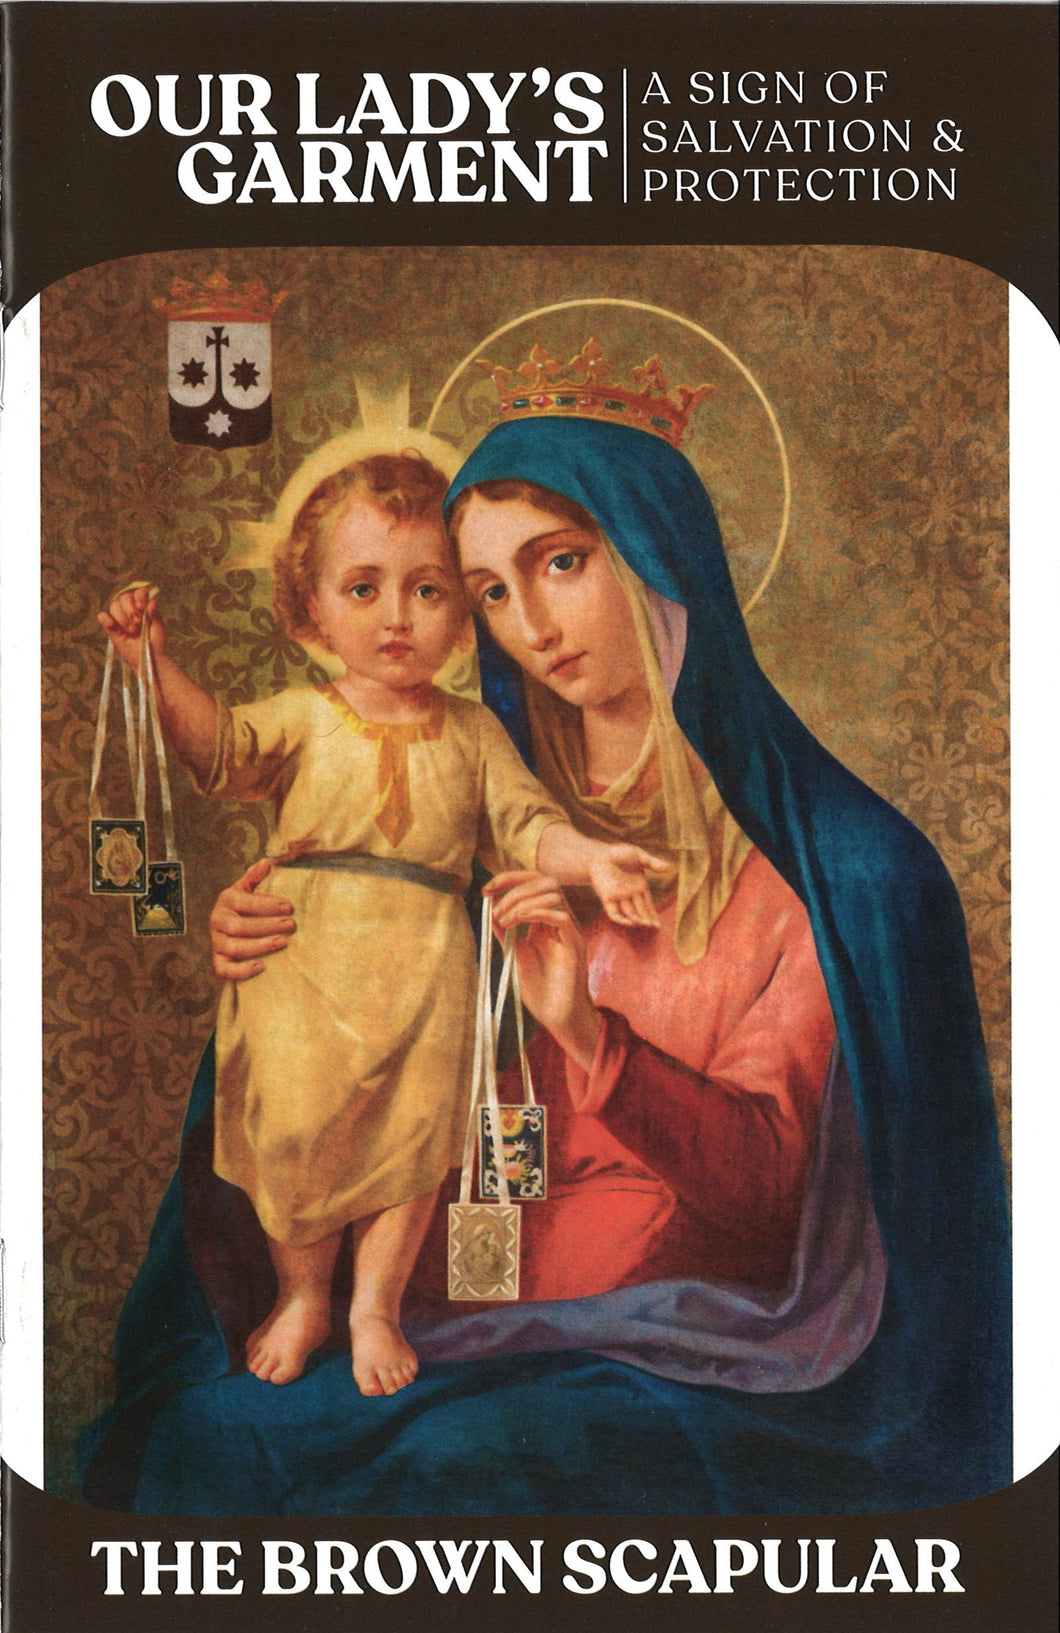 Our Lady's Garment, The Brown Scapular